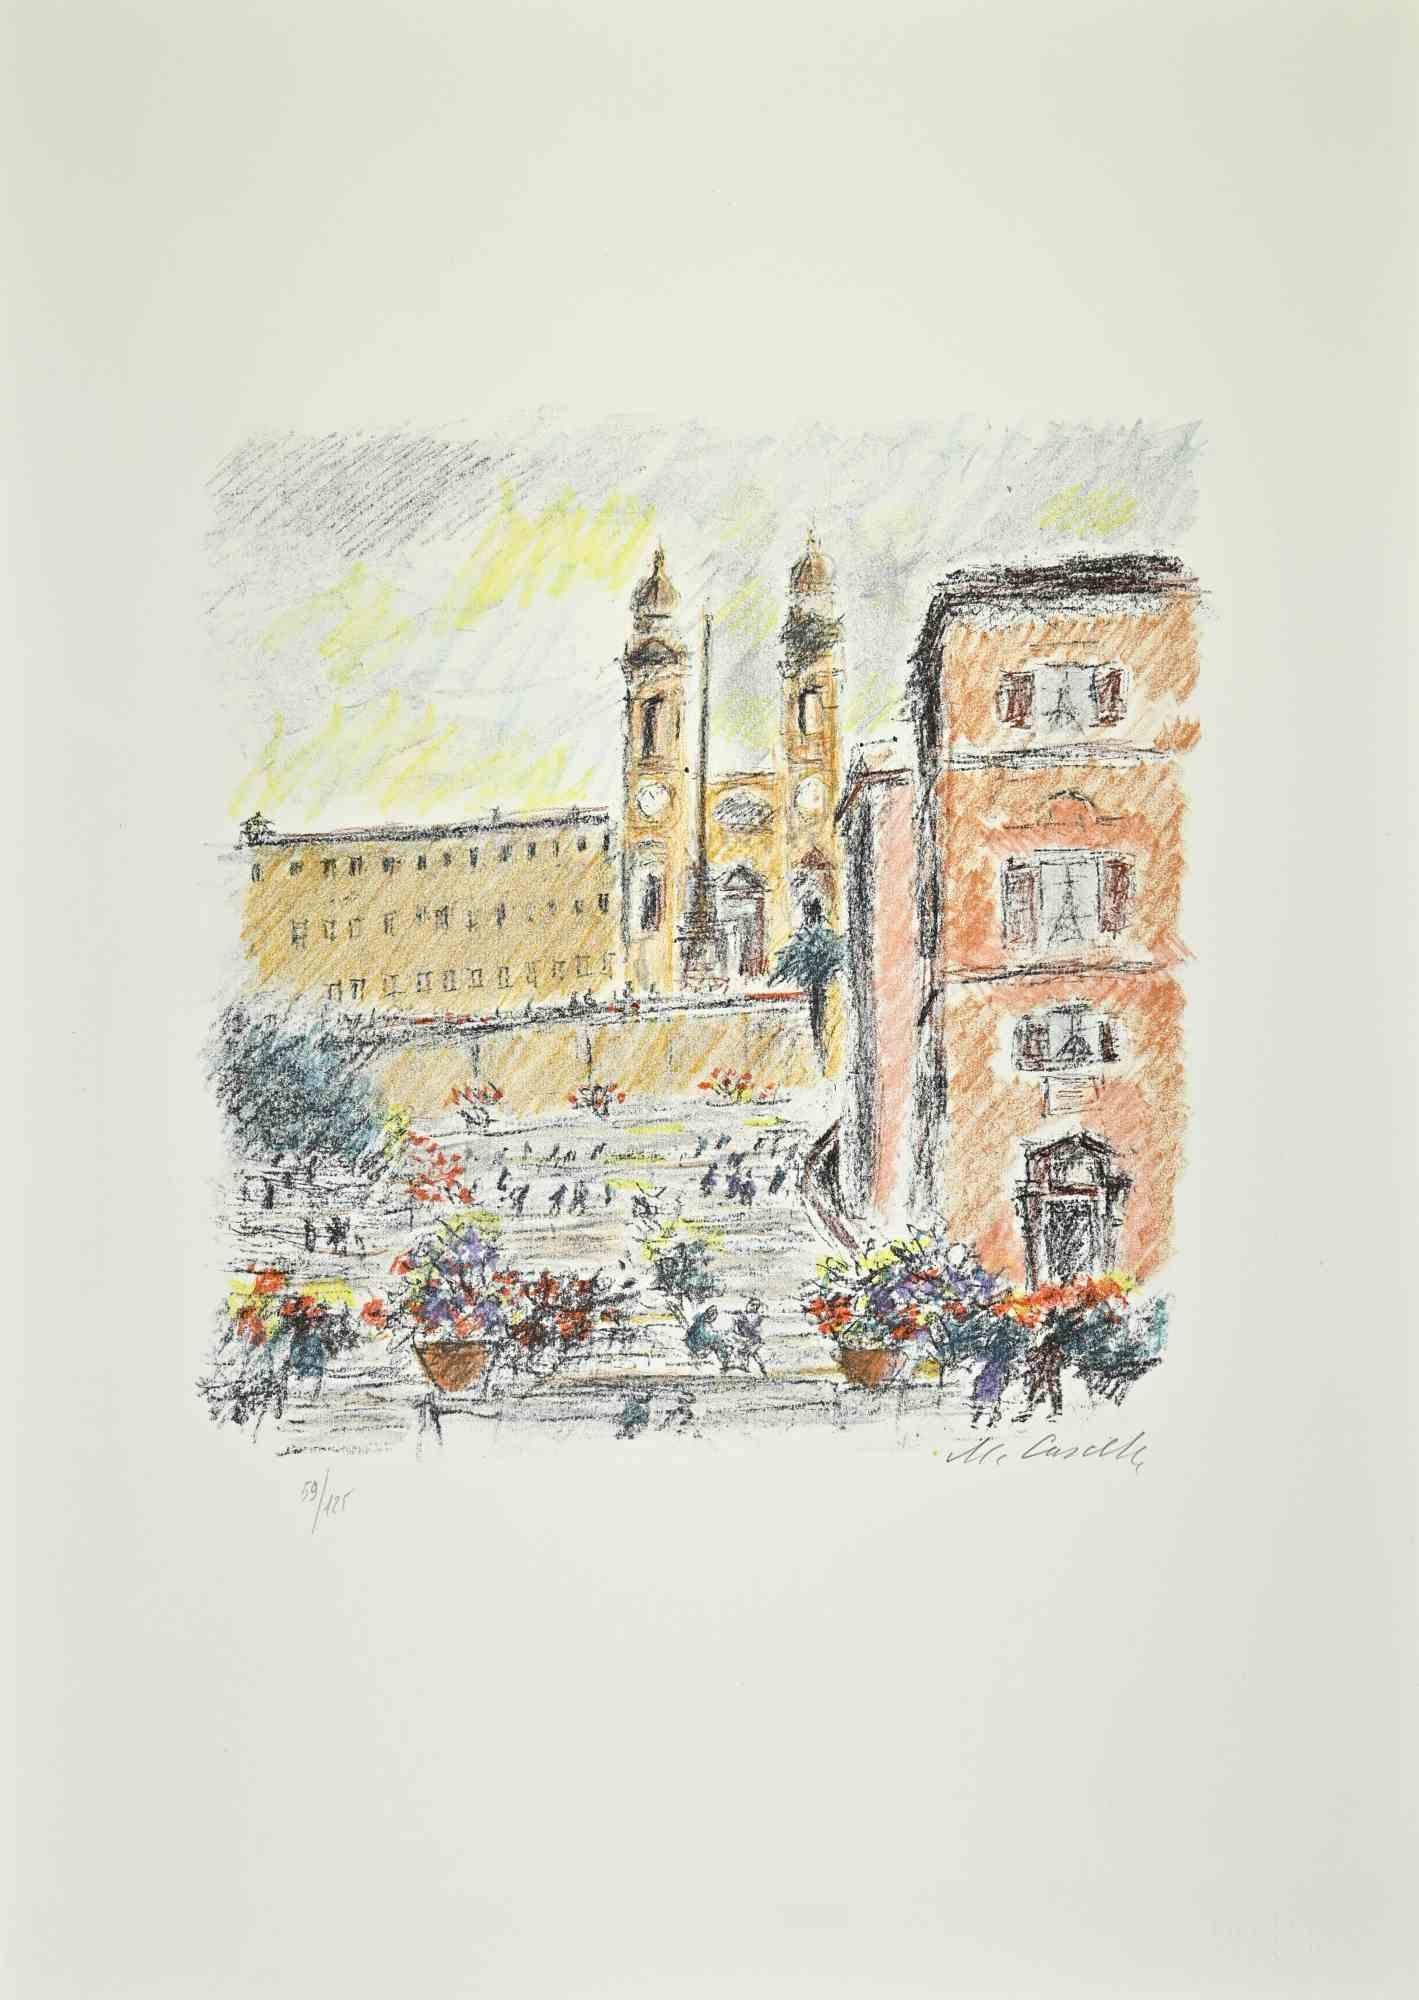 Piazza di Spagna is an artwork realized in 1979, by the Italian Artist Michele Cascella.

Colored lithograph on paper of the Portfolio "Landscape", 1979, with six original lithograph and the poems of Franco Simongini titled "Twenty Landscapes